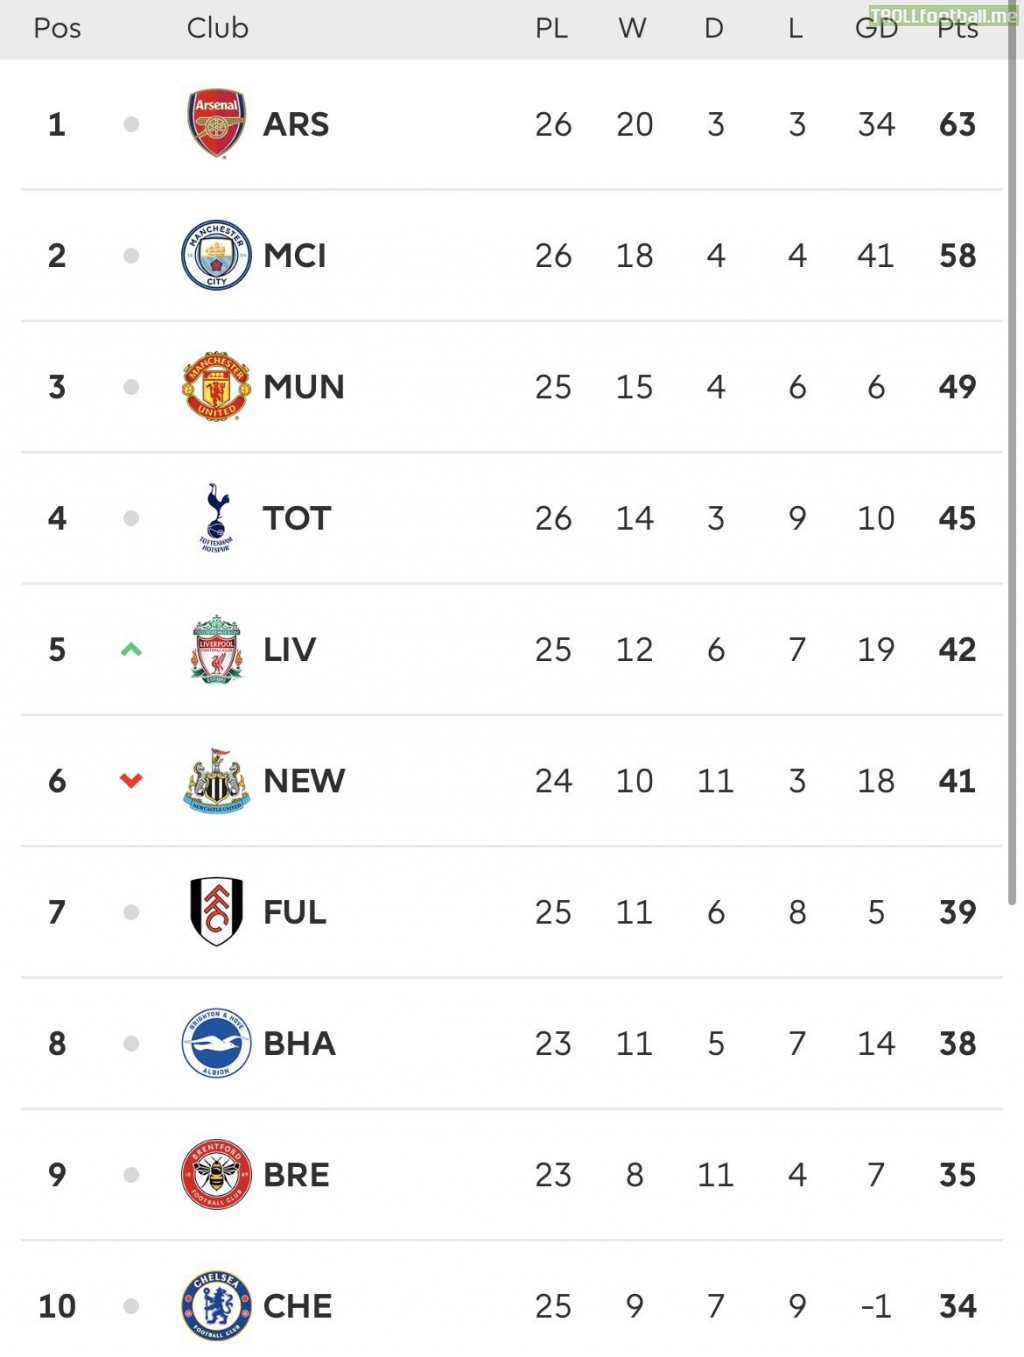 The Premier League battle for top four is getting interesting, how do you think the table will look at the end of the season?